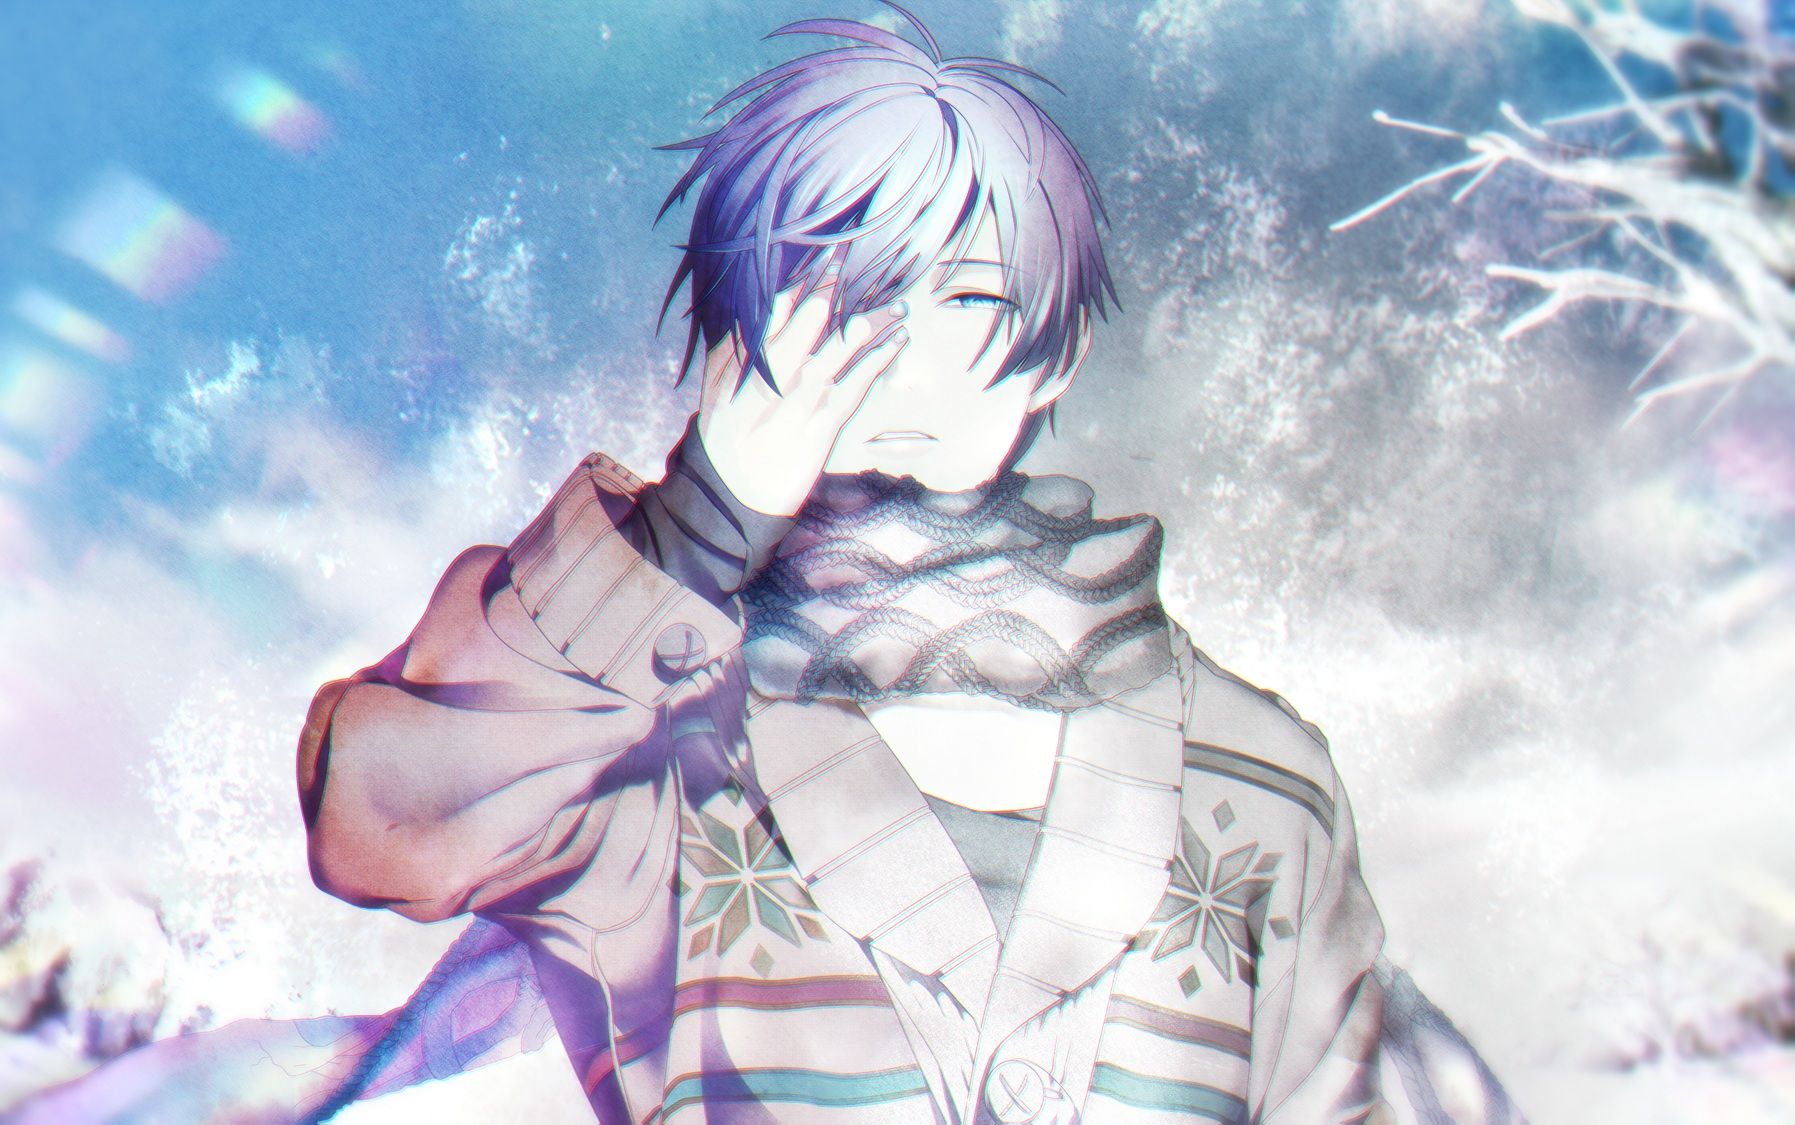 8. "Kaito" from Vocaloid - wide 2